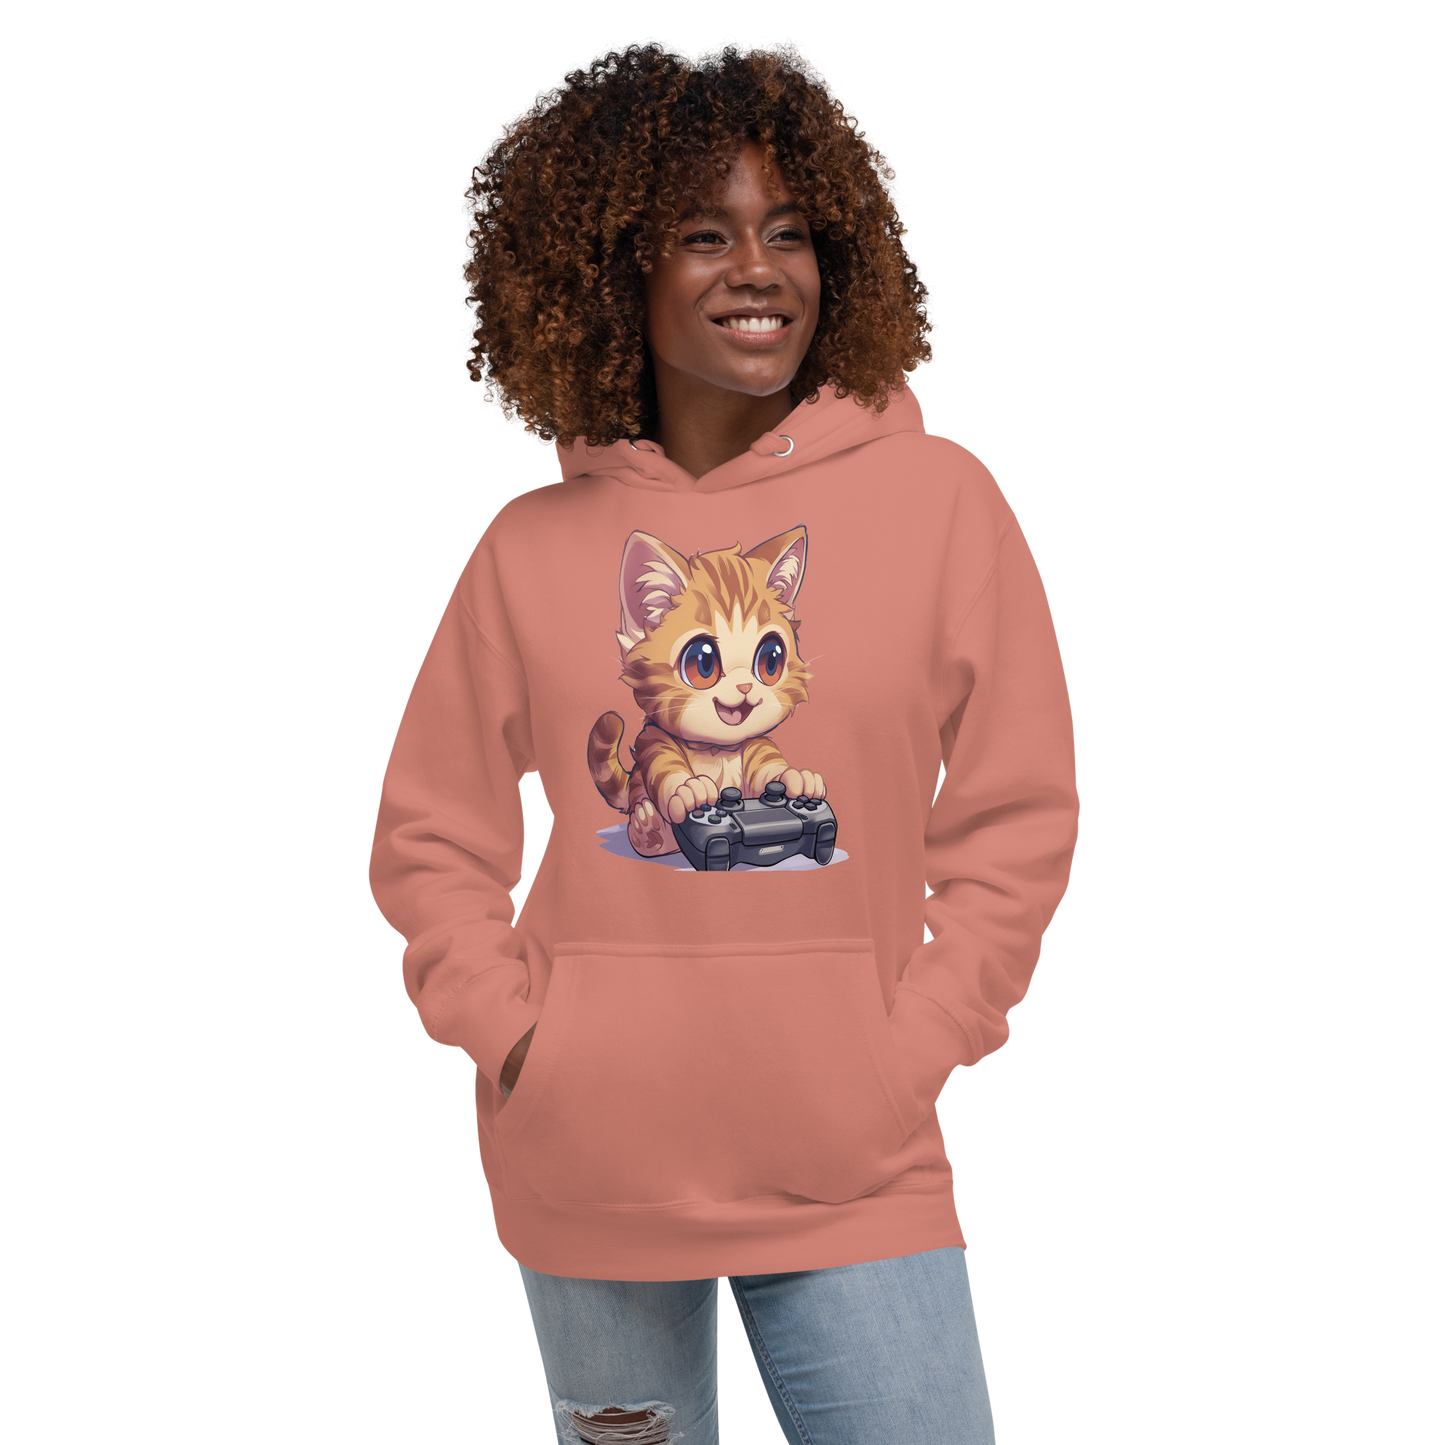 Adorable Cat Playing Video Games – Gamer Hoodie